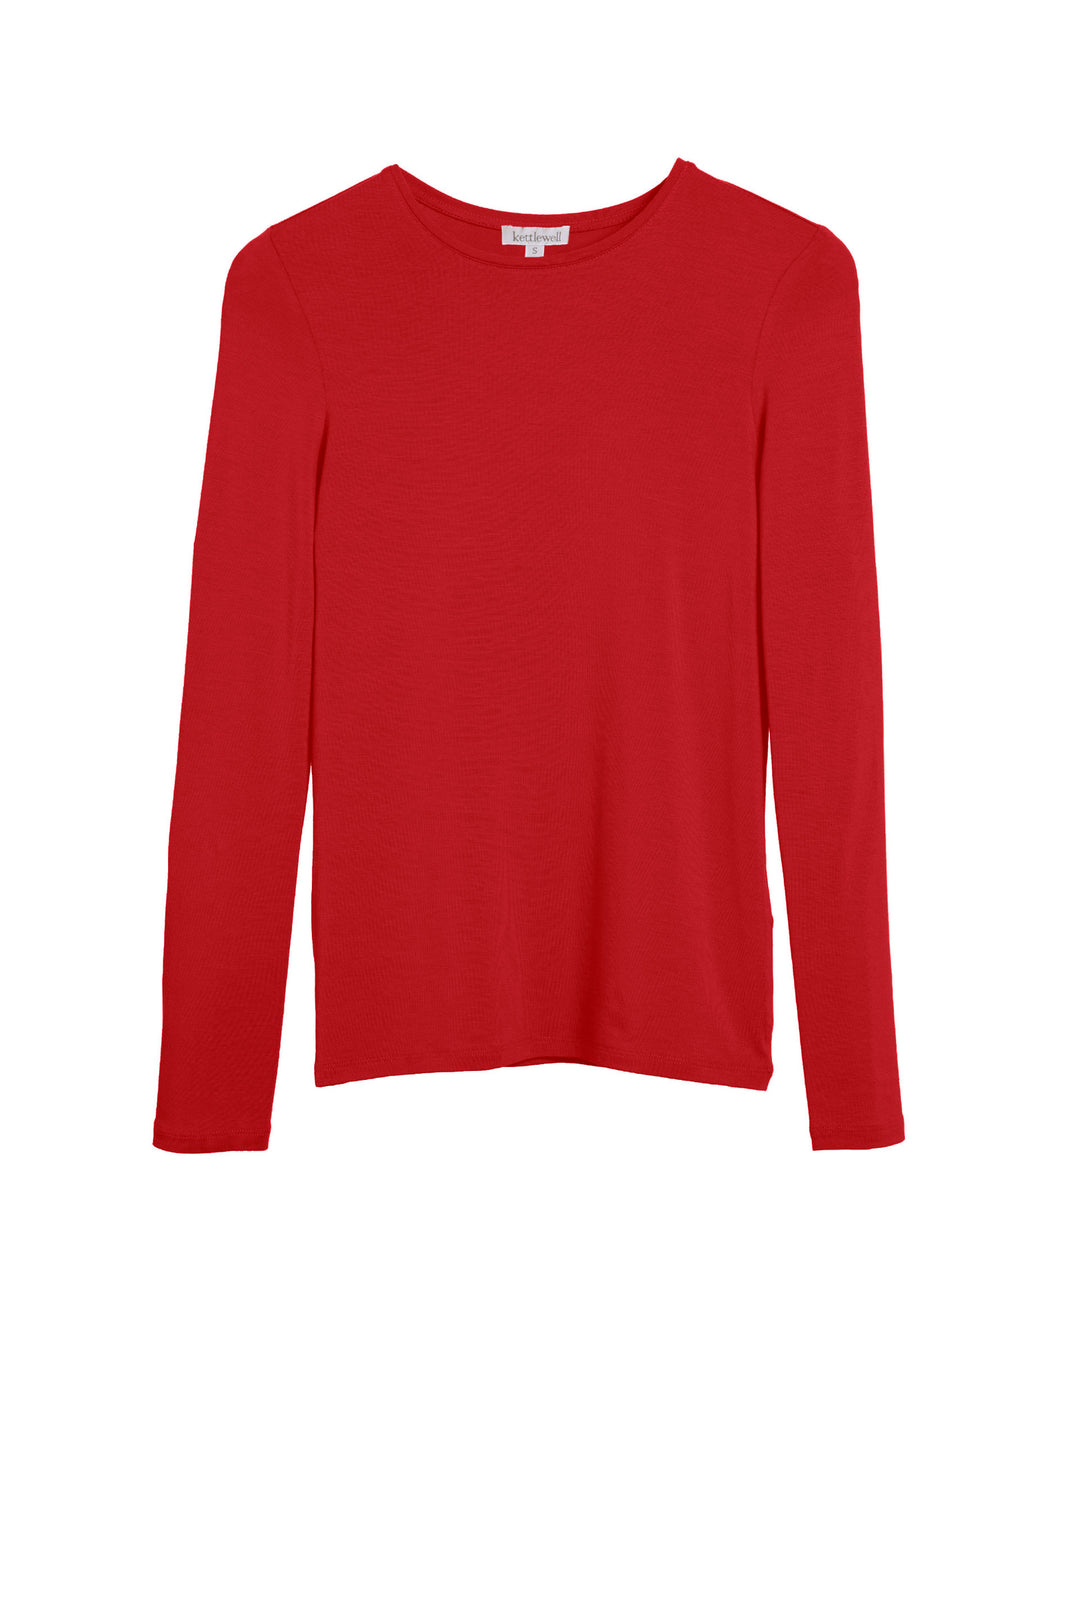 Kettlewell Silky Crew Neck - True Red